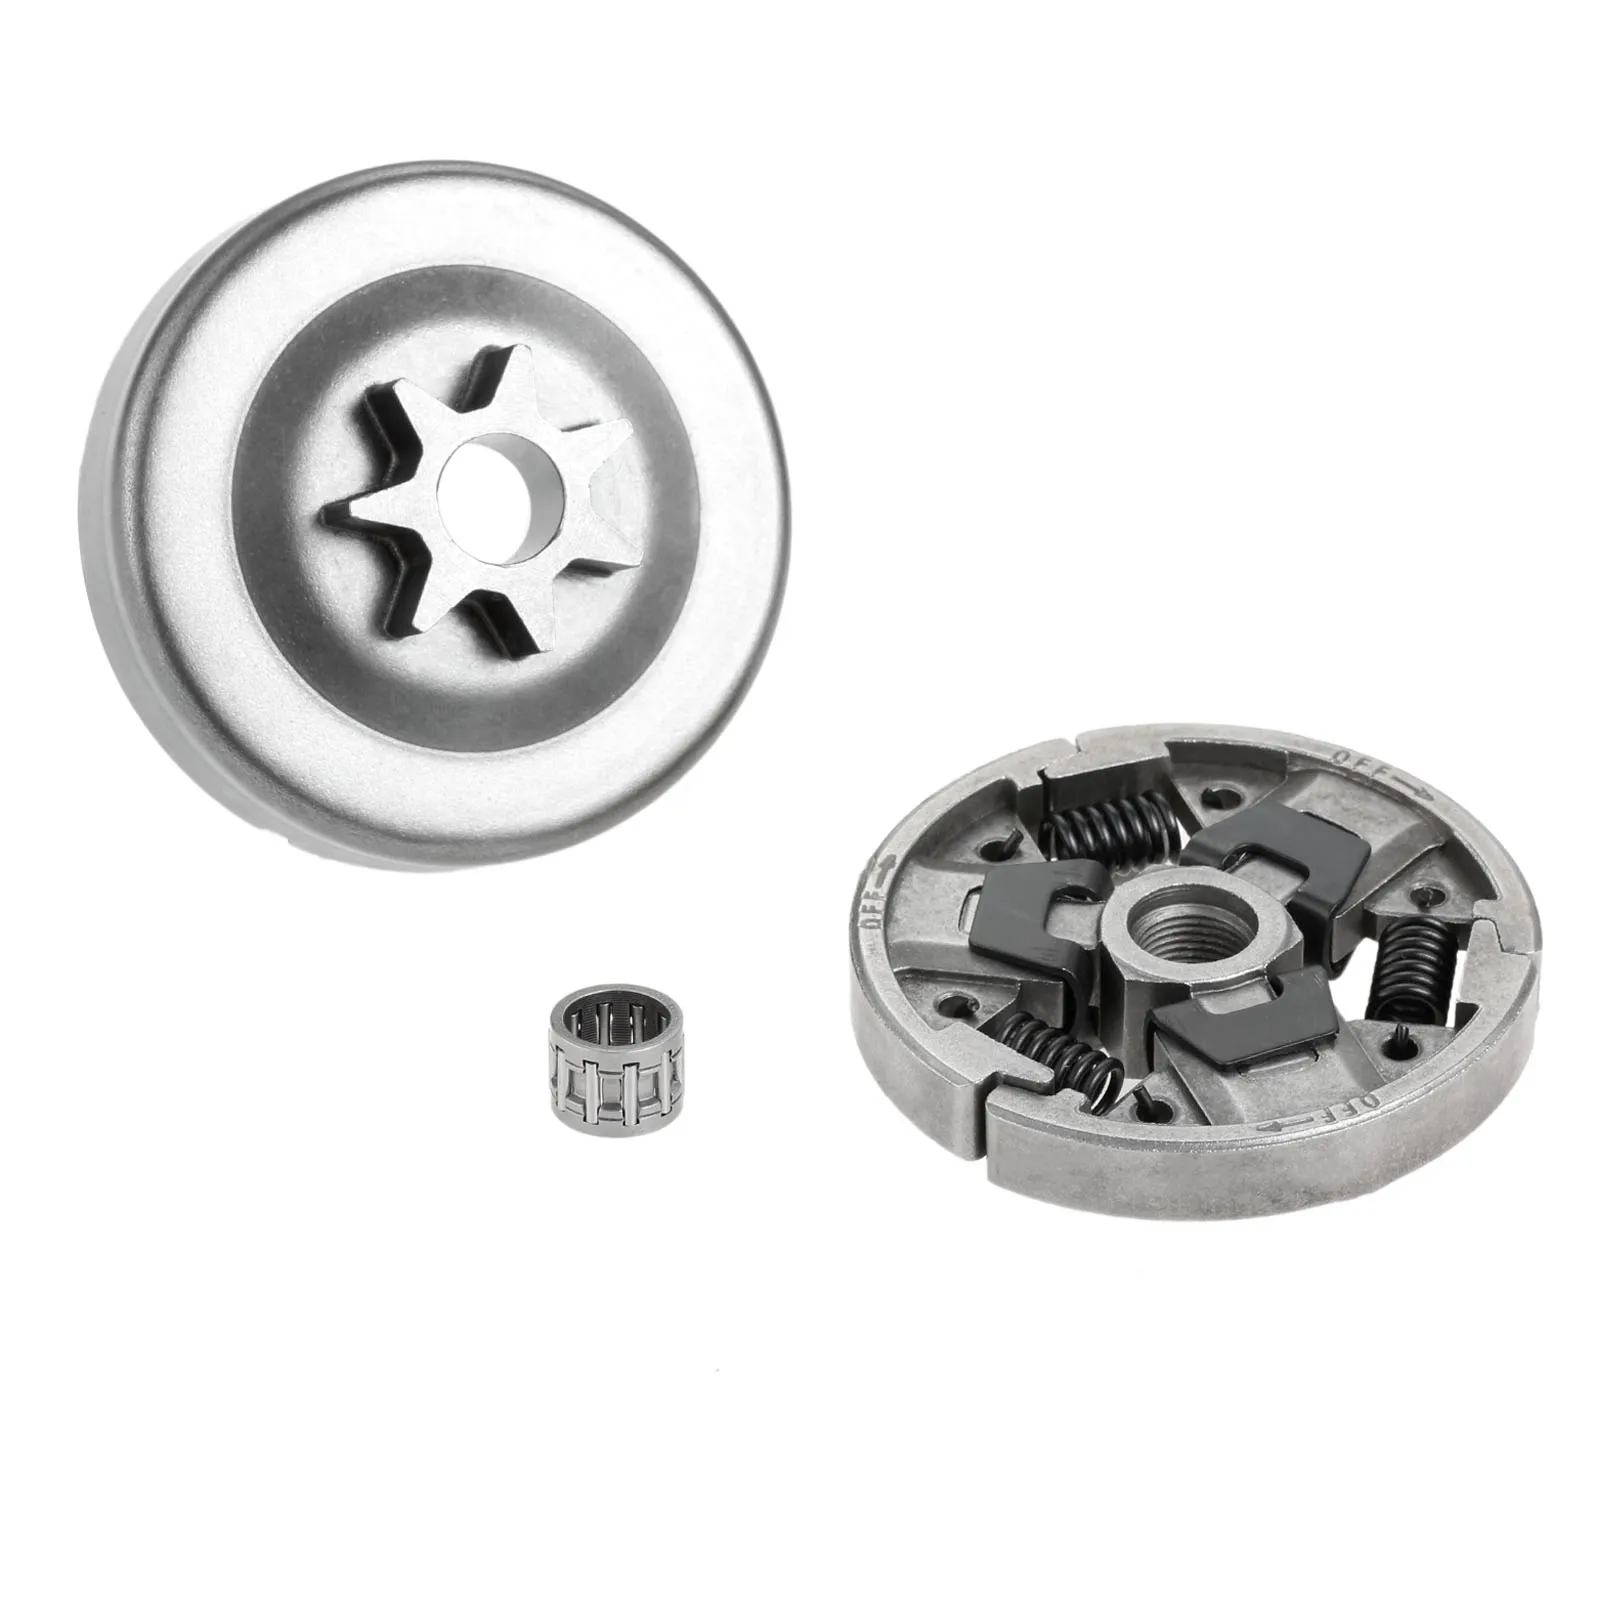 Clutch Drum And Needle Bearing Kit For Stihl Chainsaws 1121 640 2051 ...